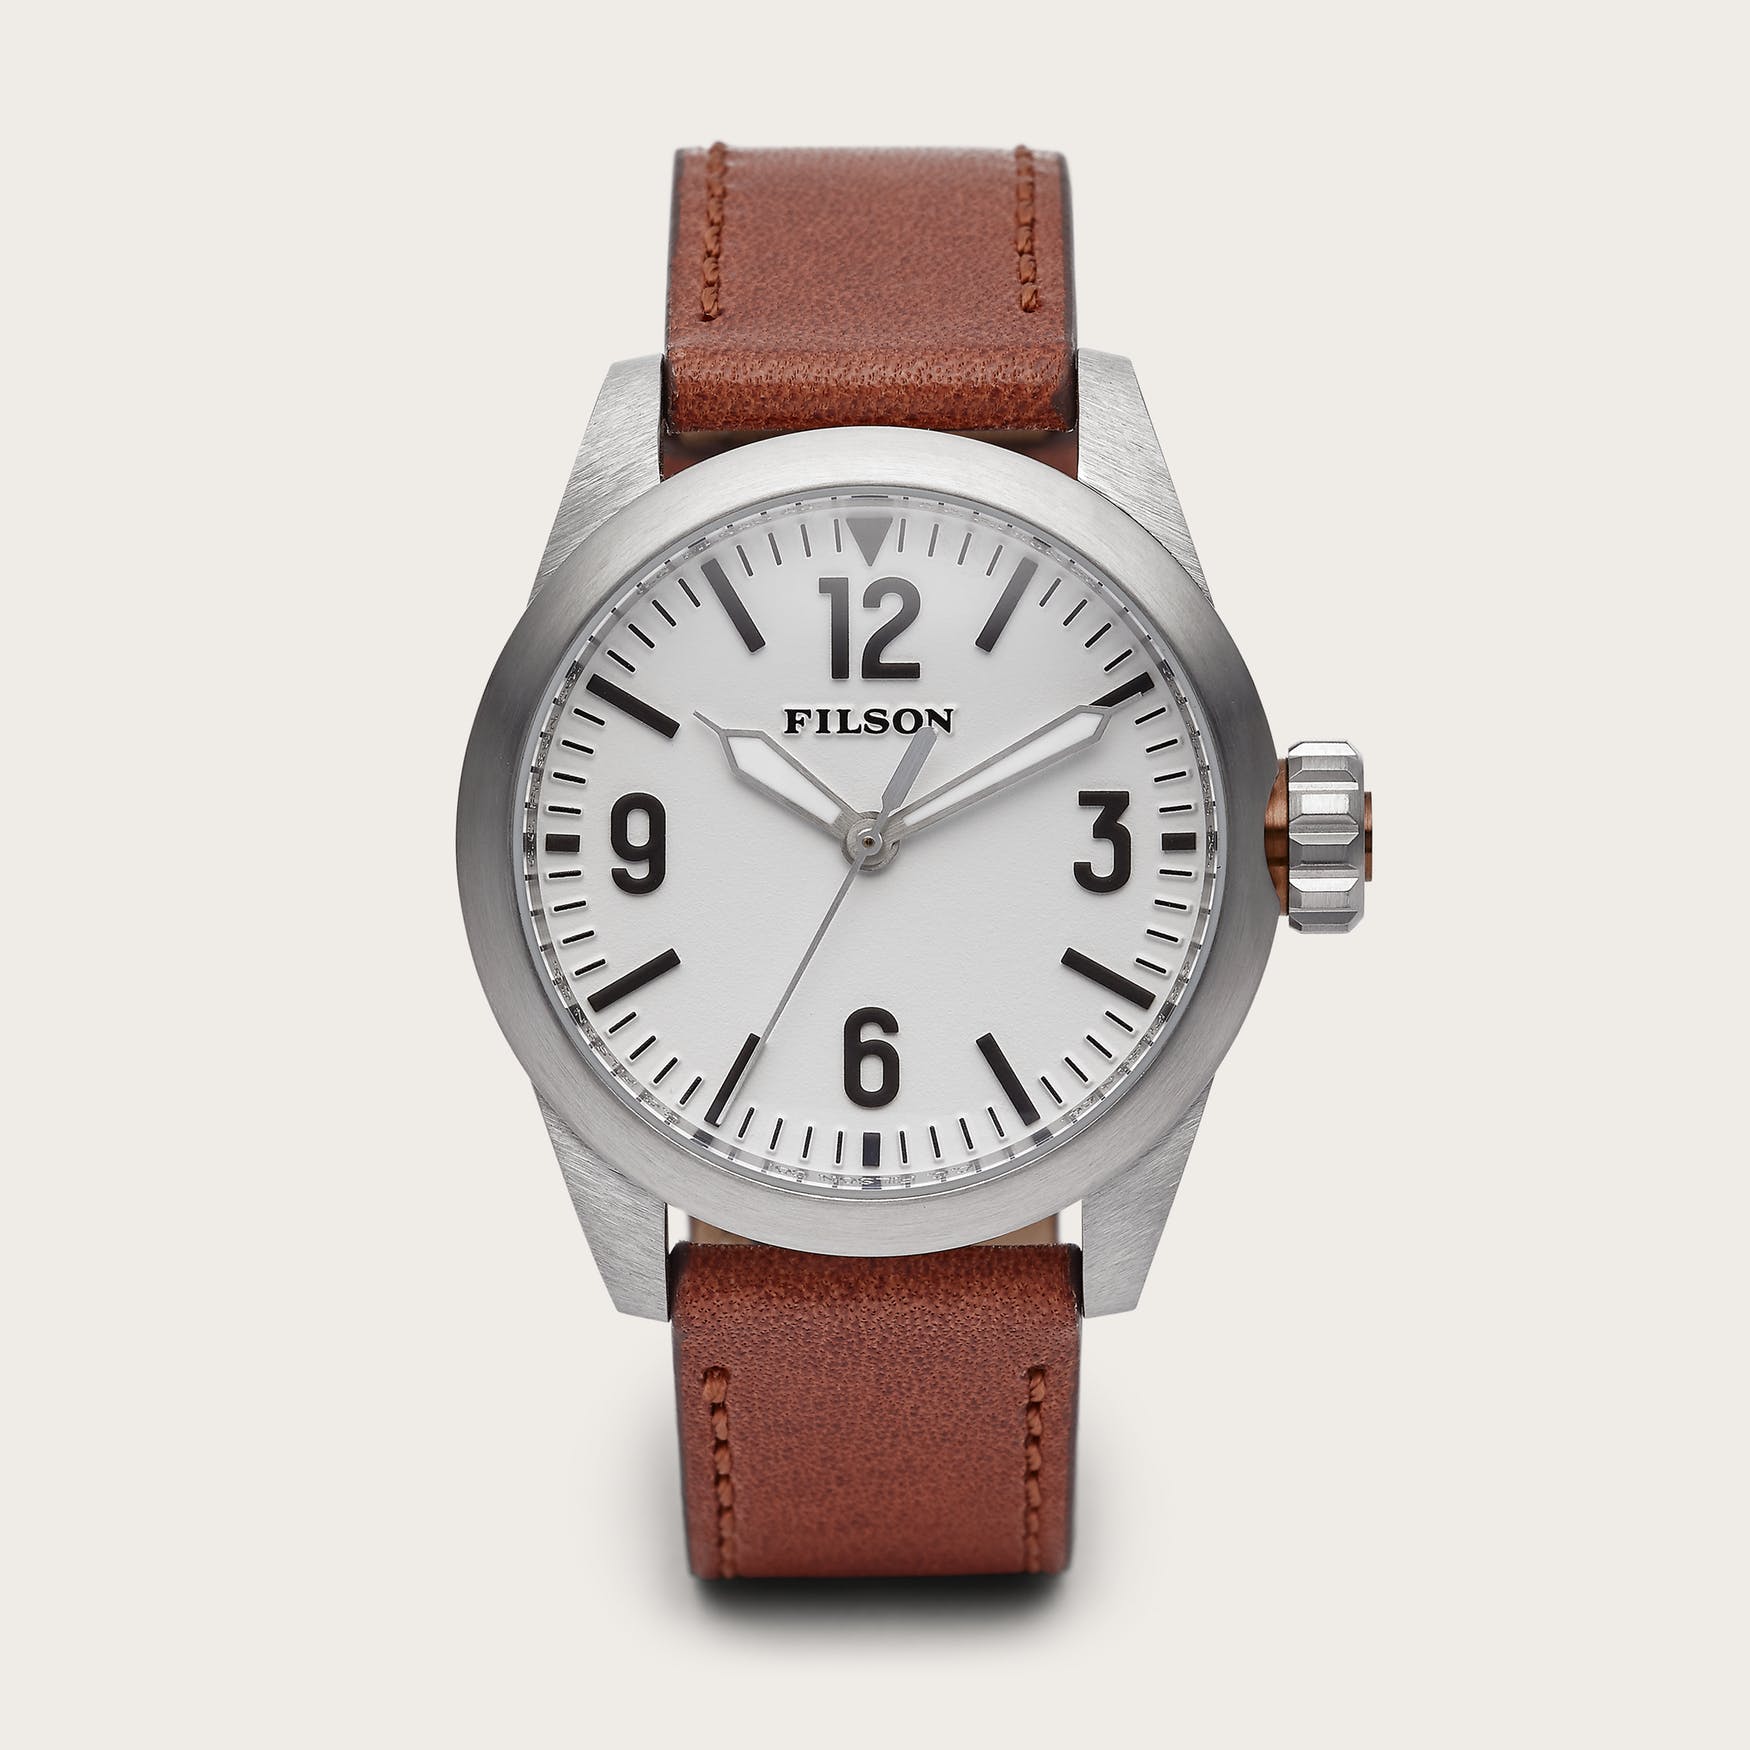 Filson Watch Sale: 5 of the Best Timepiece Bargains | The Coolector